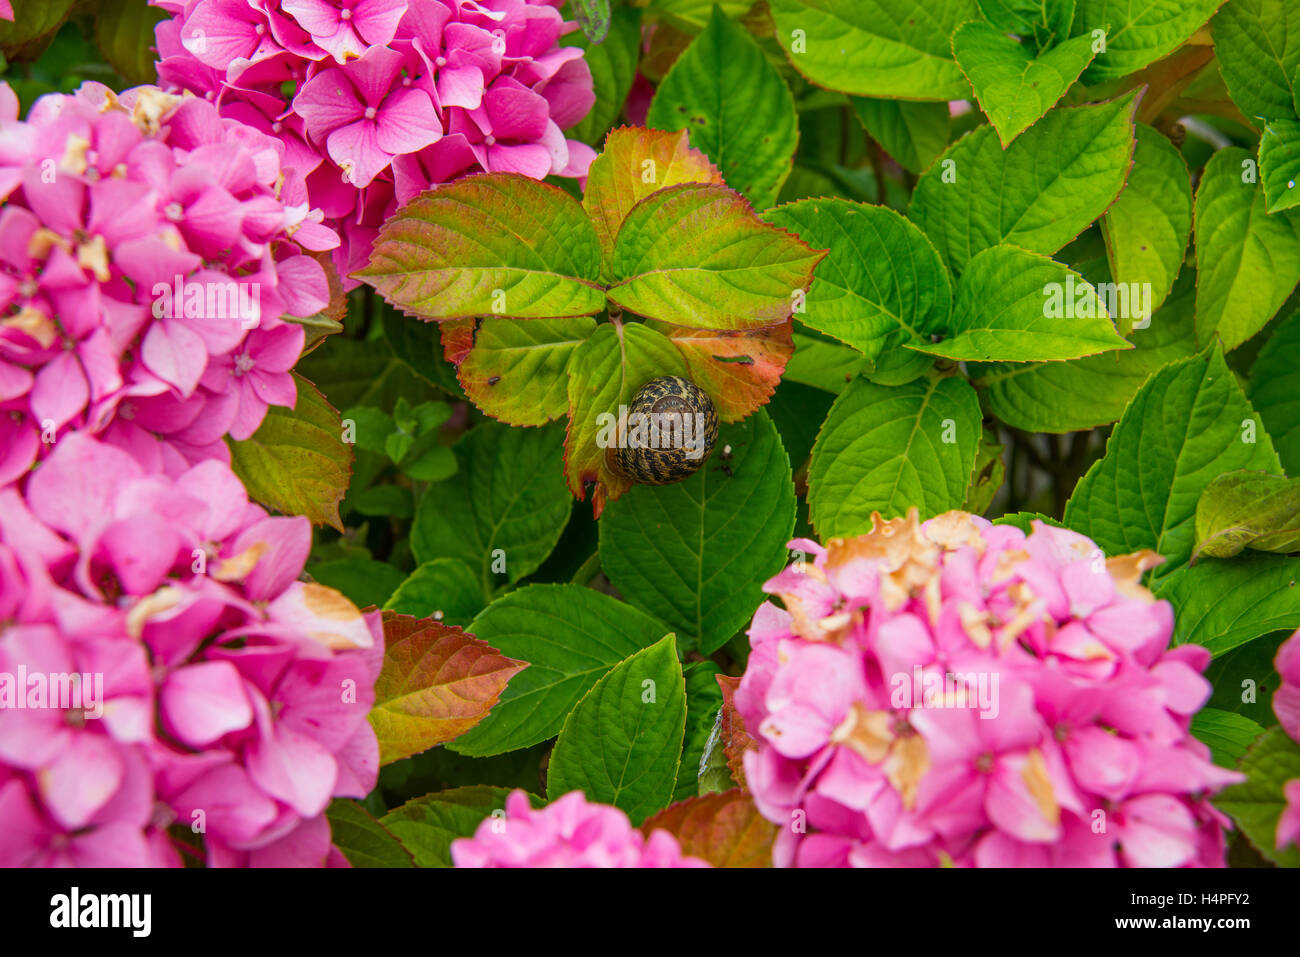 Hydrangea flowers and snail, close view. Stock Photo